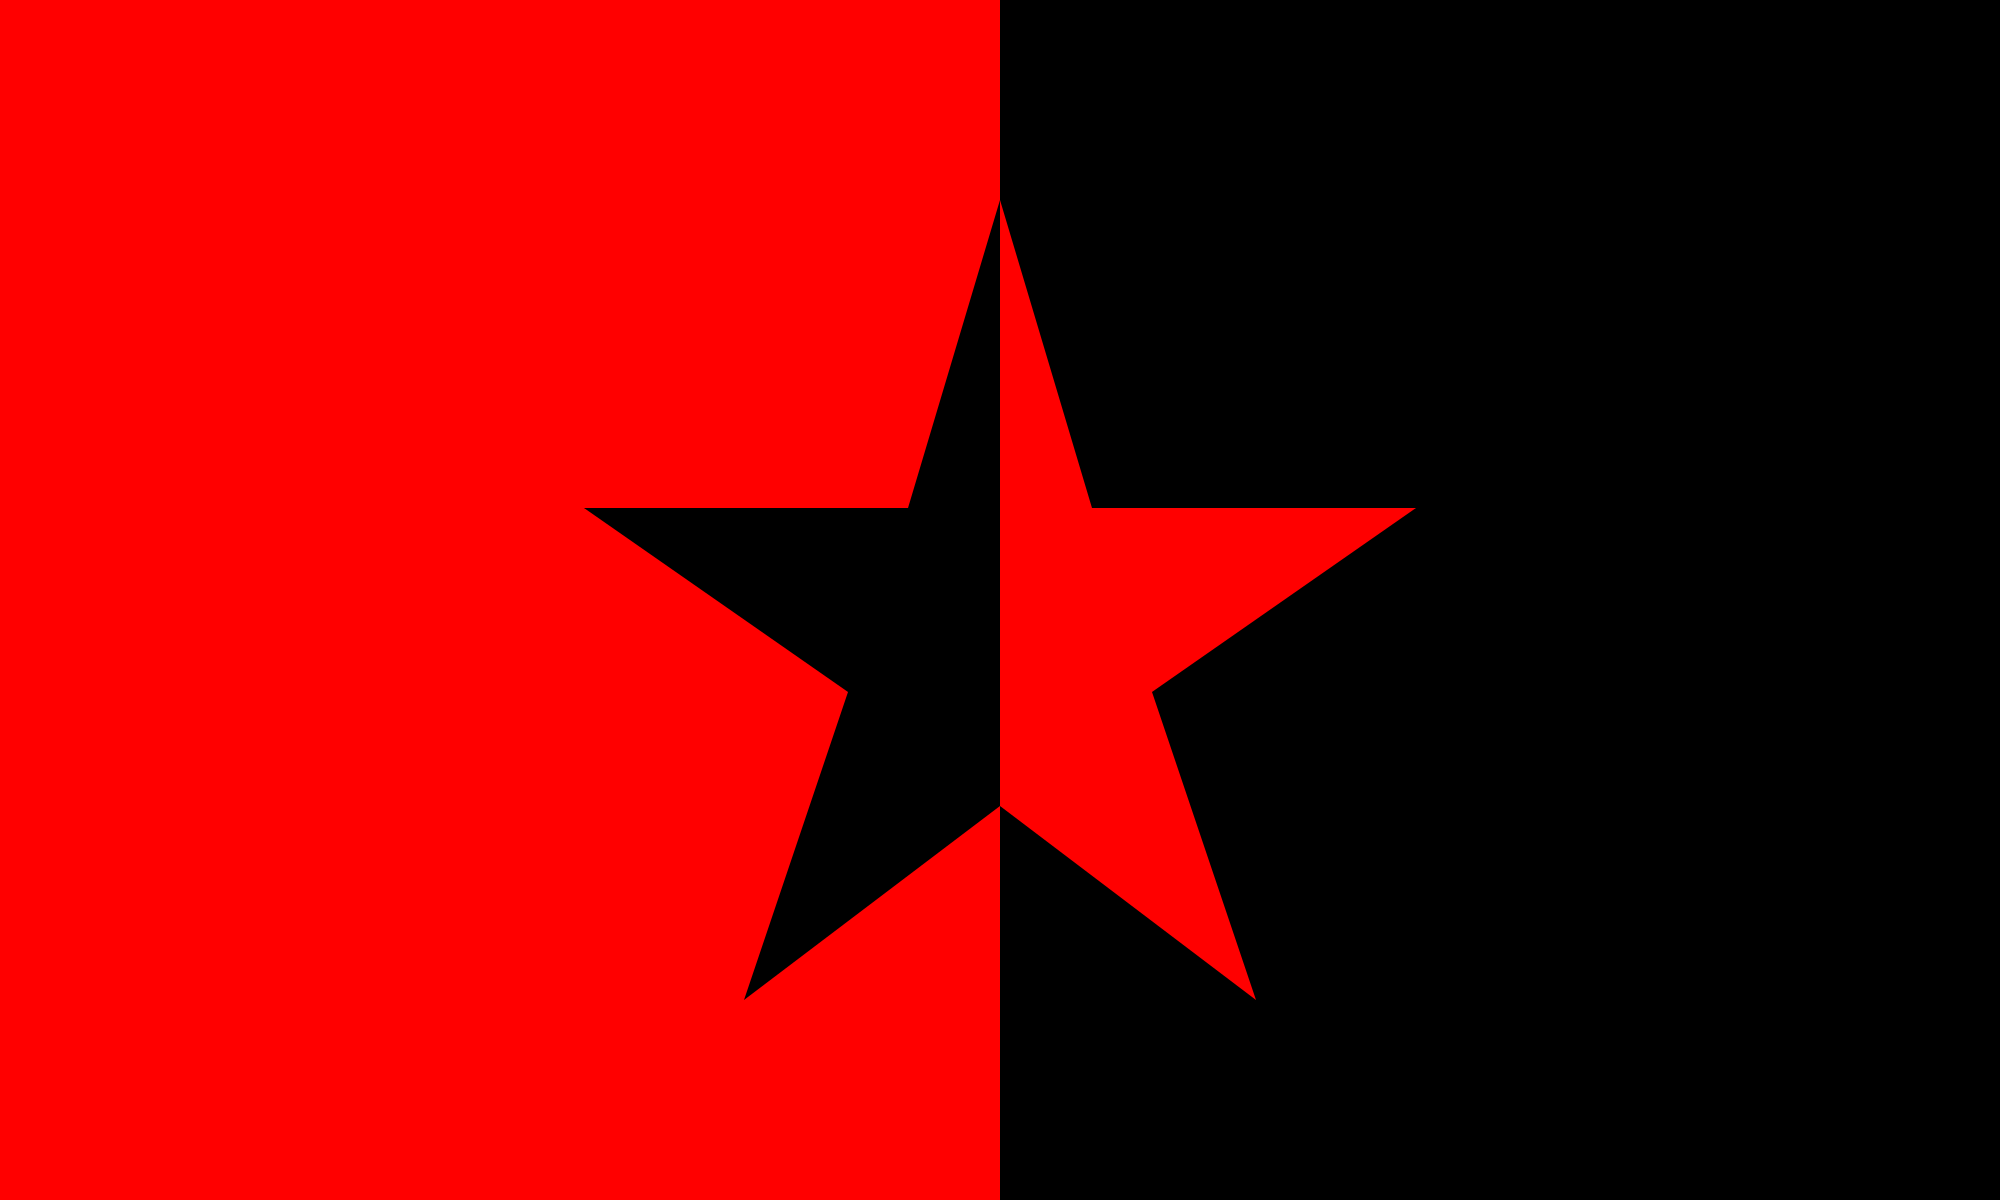 Cool Black and Red Logo - File:Red black star flag.svg - Wikimedia Commons